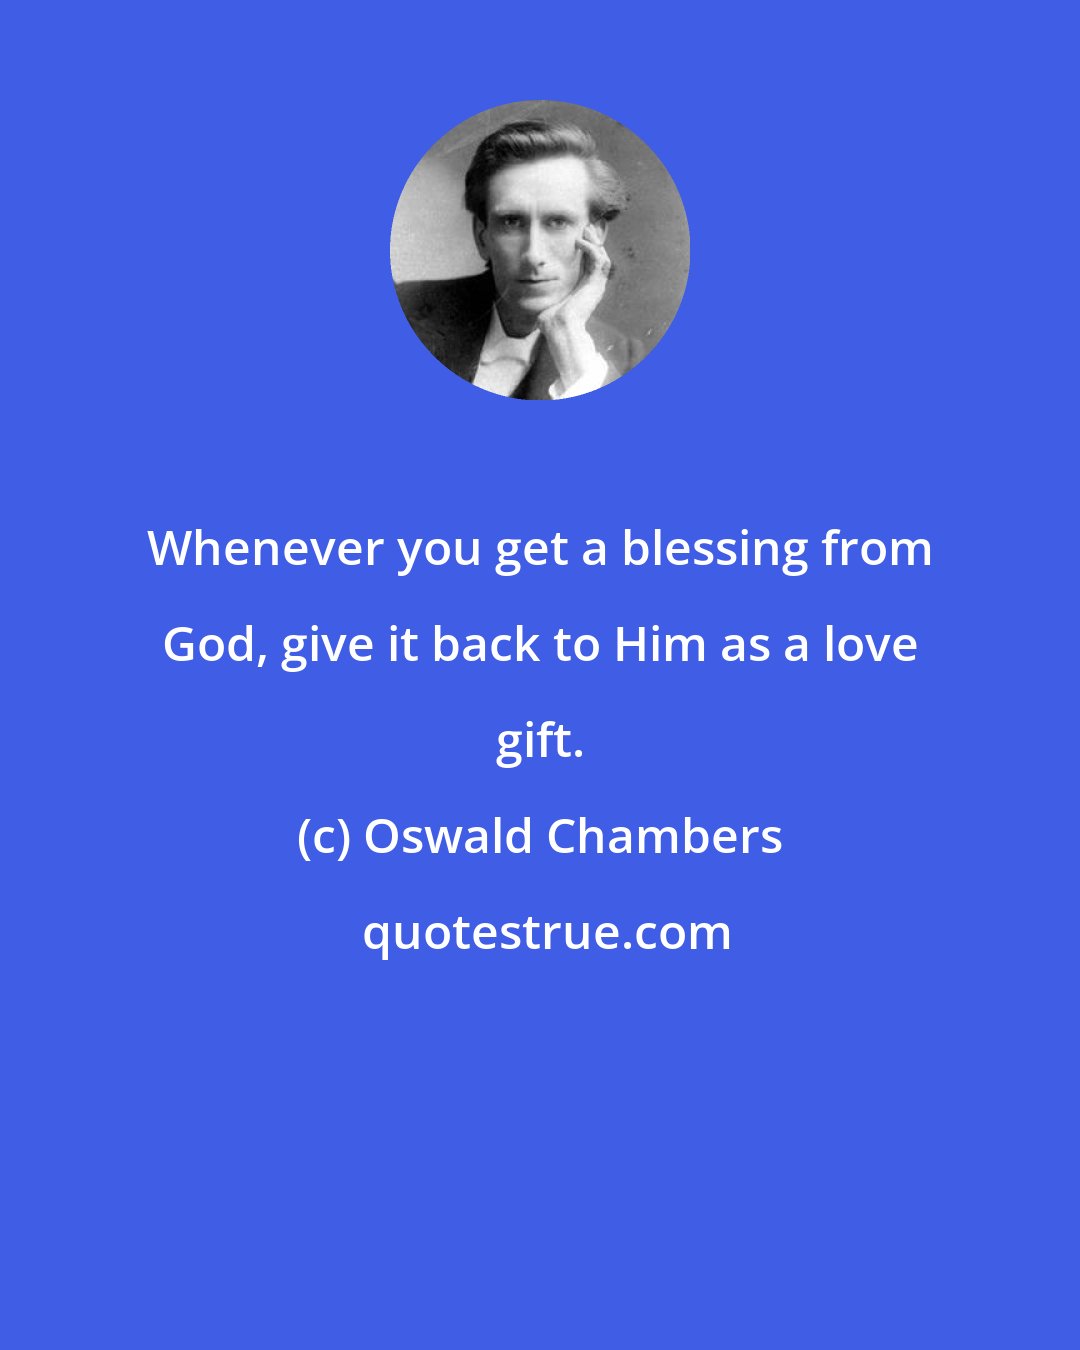 Oswald Chambers: Whenever you get a blessing from God, give it back to Him as a love gift.